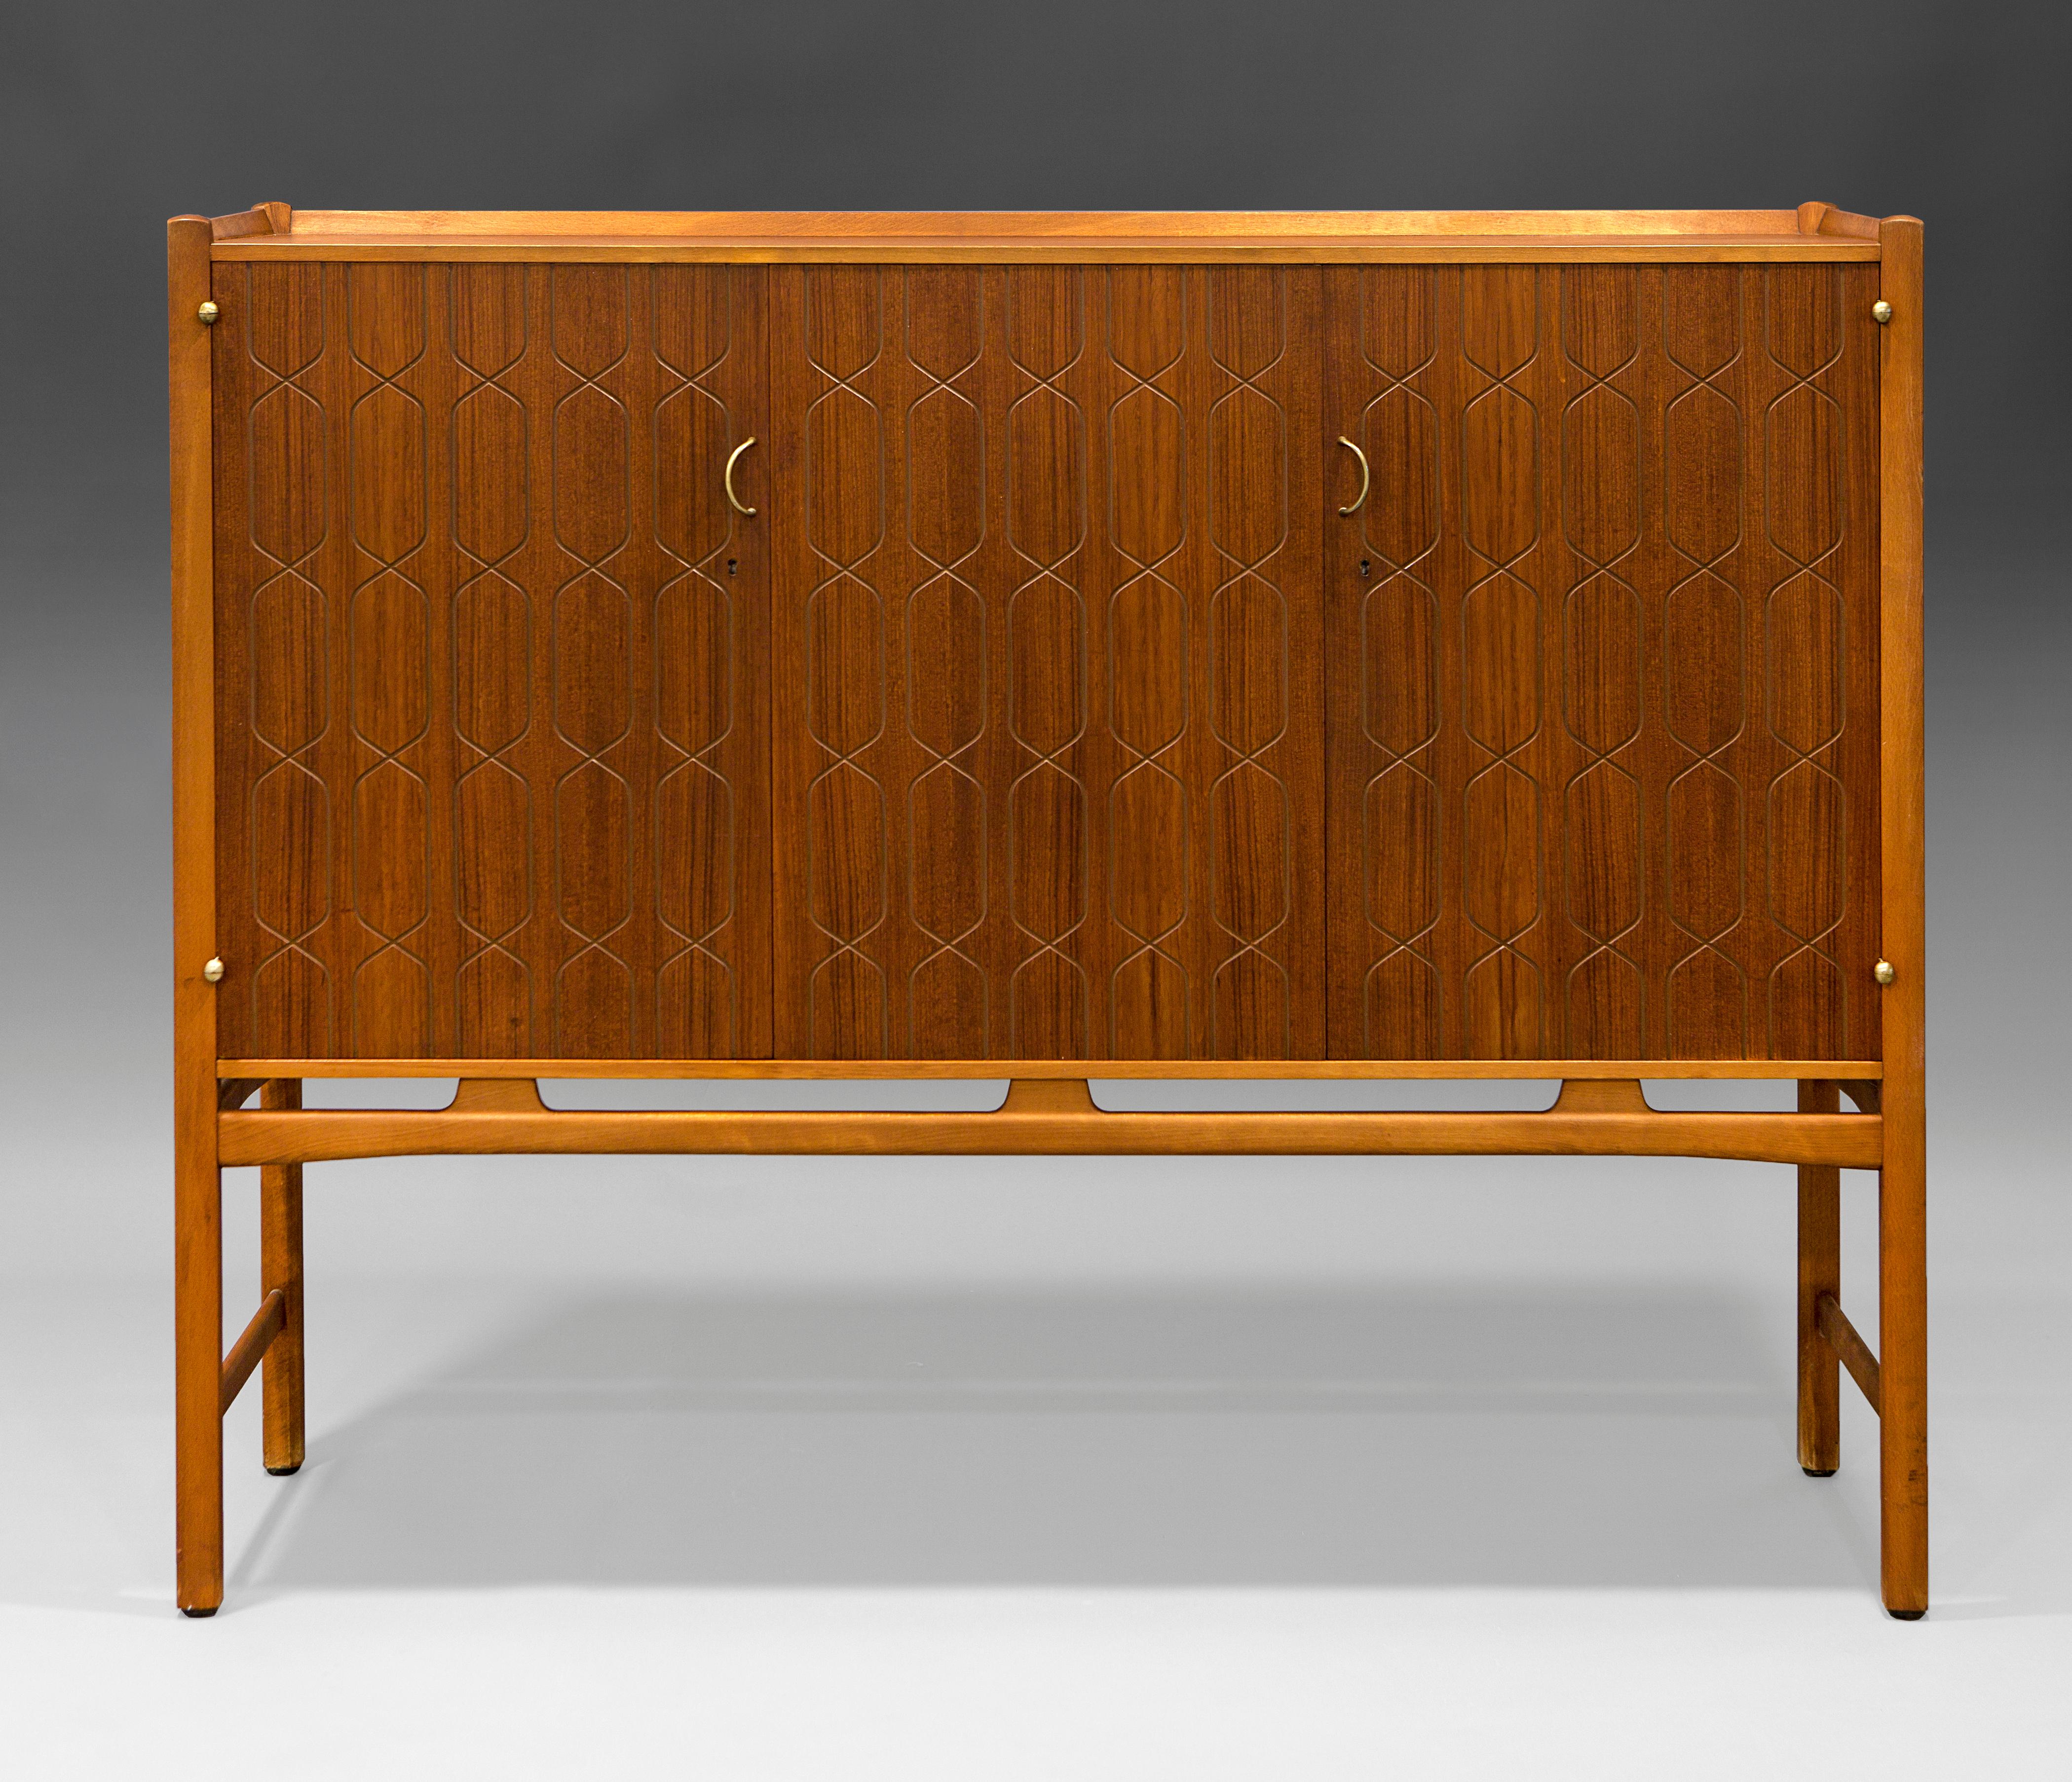 “Napoli” cabinet in teak and beech designed by David Rosén. Produced by Nordiska Kompaniet in Sweden, 50´s. This storage piece is made out of teak and beech with brass fittings. It comes with the original locks and key. The doors are carved with